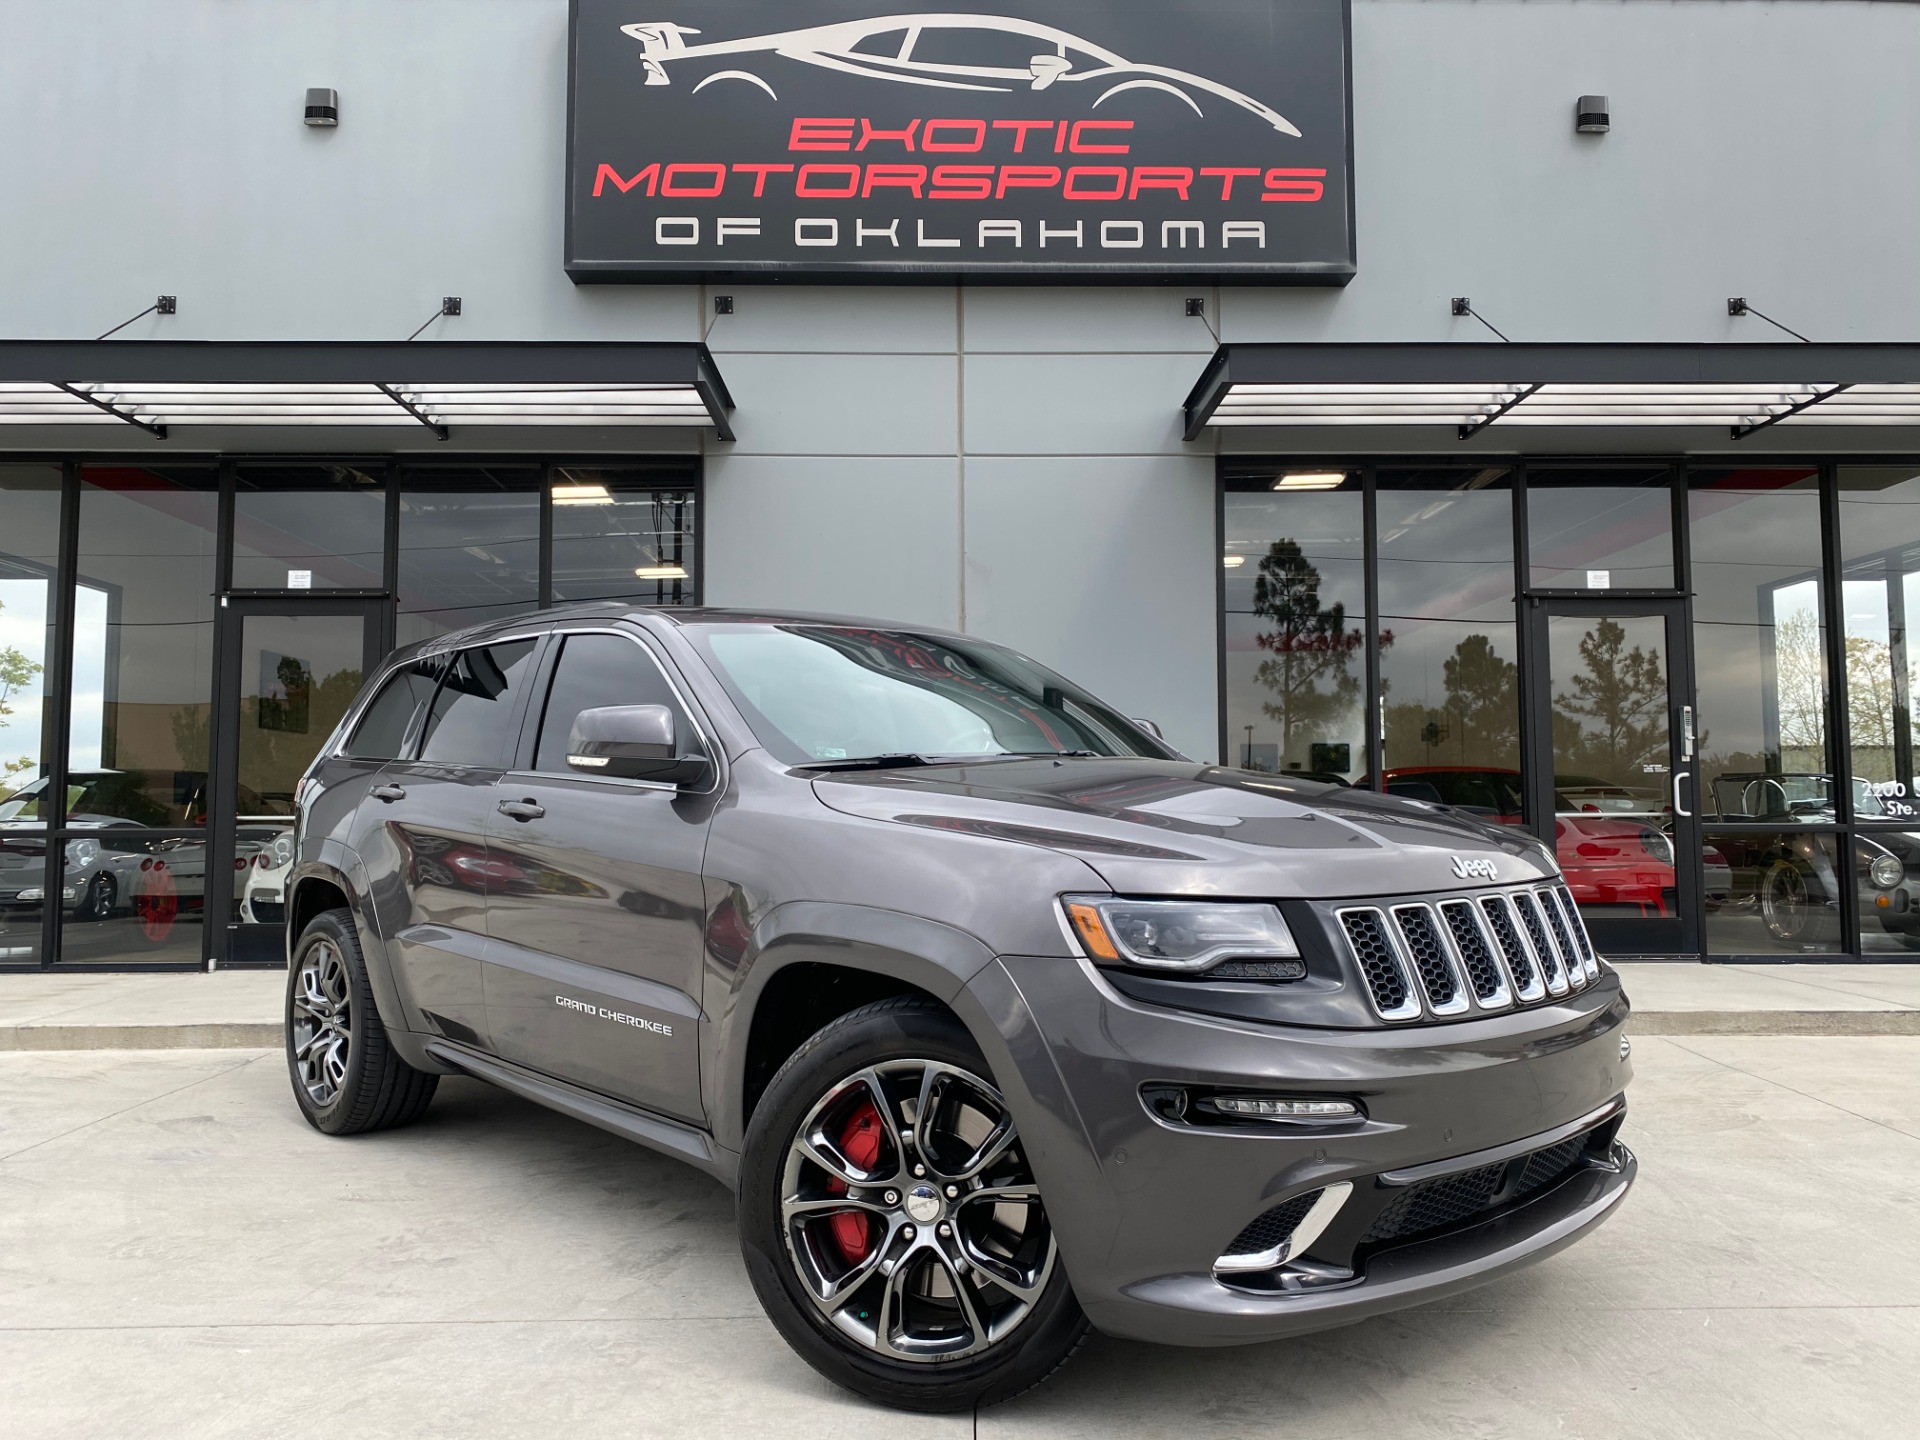 Used 2015 Jeep Grand Cherokee SRT For Sale (Sold) | Exotic Motorsports